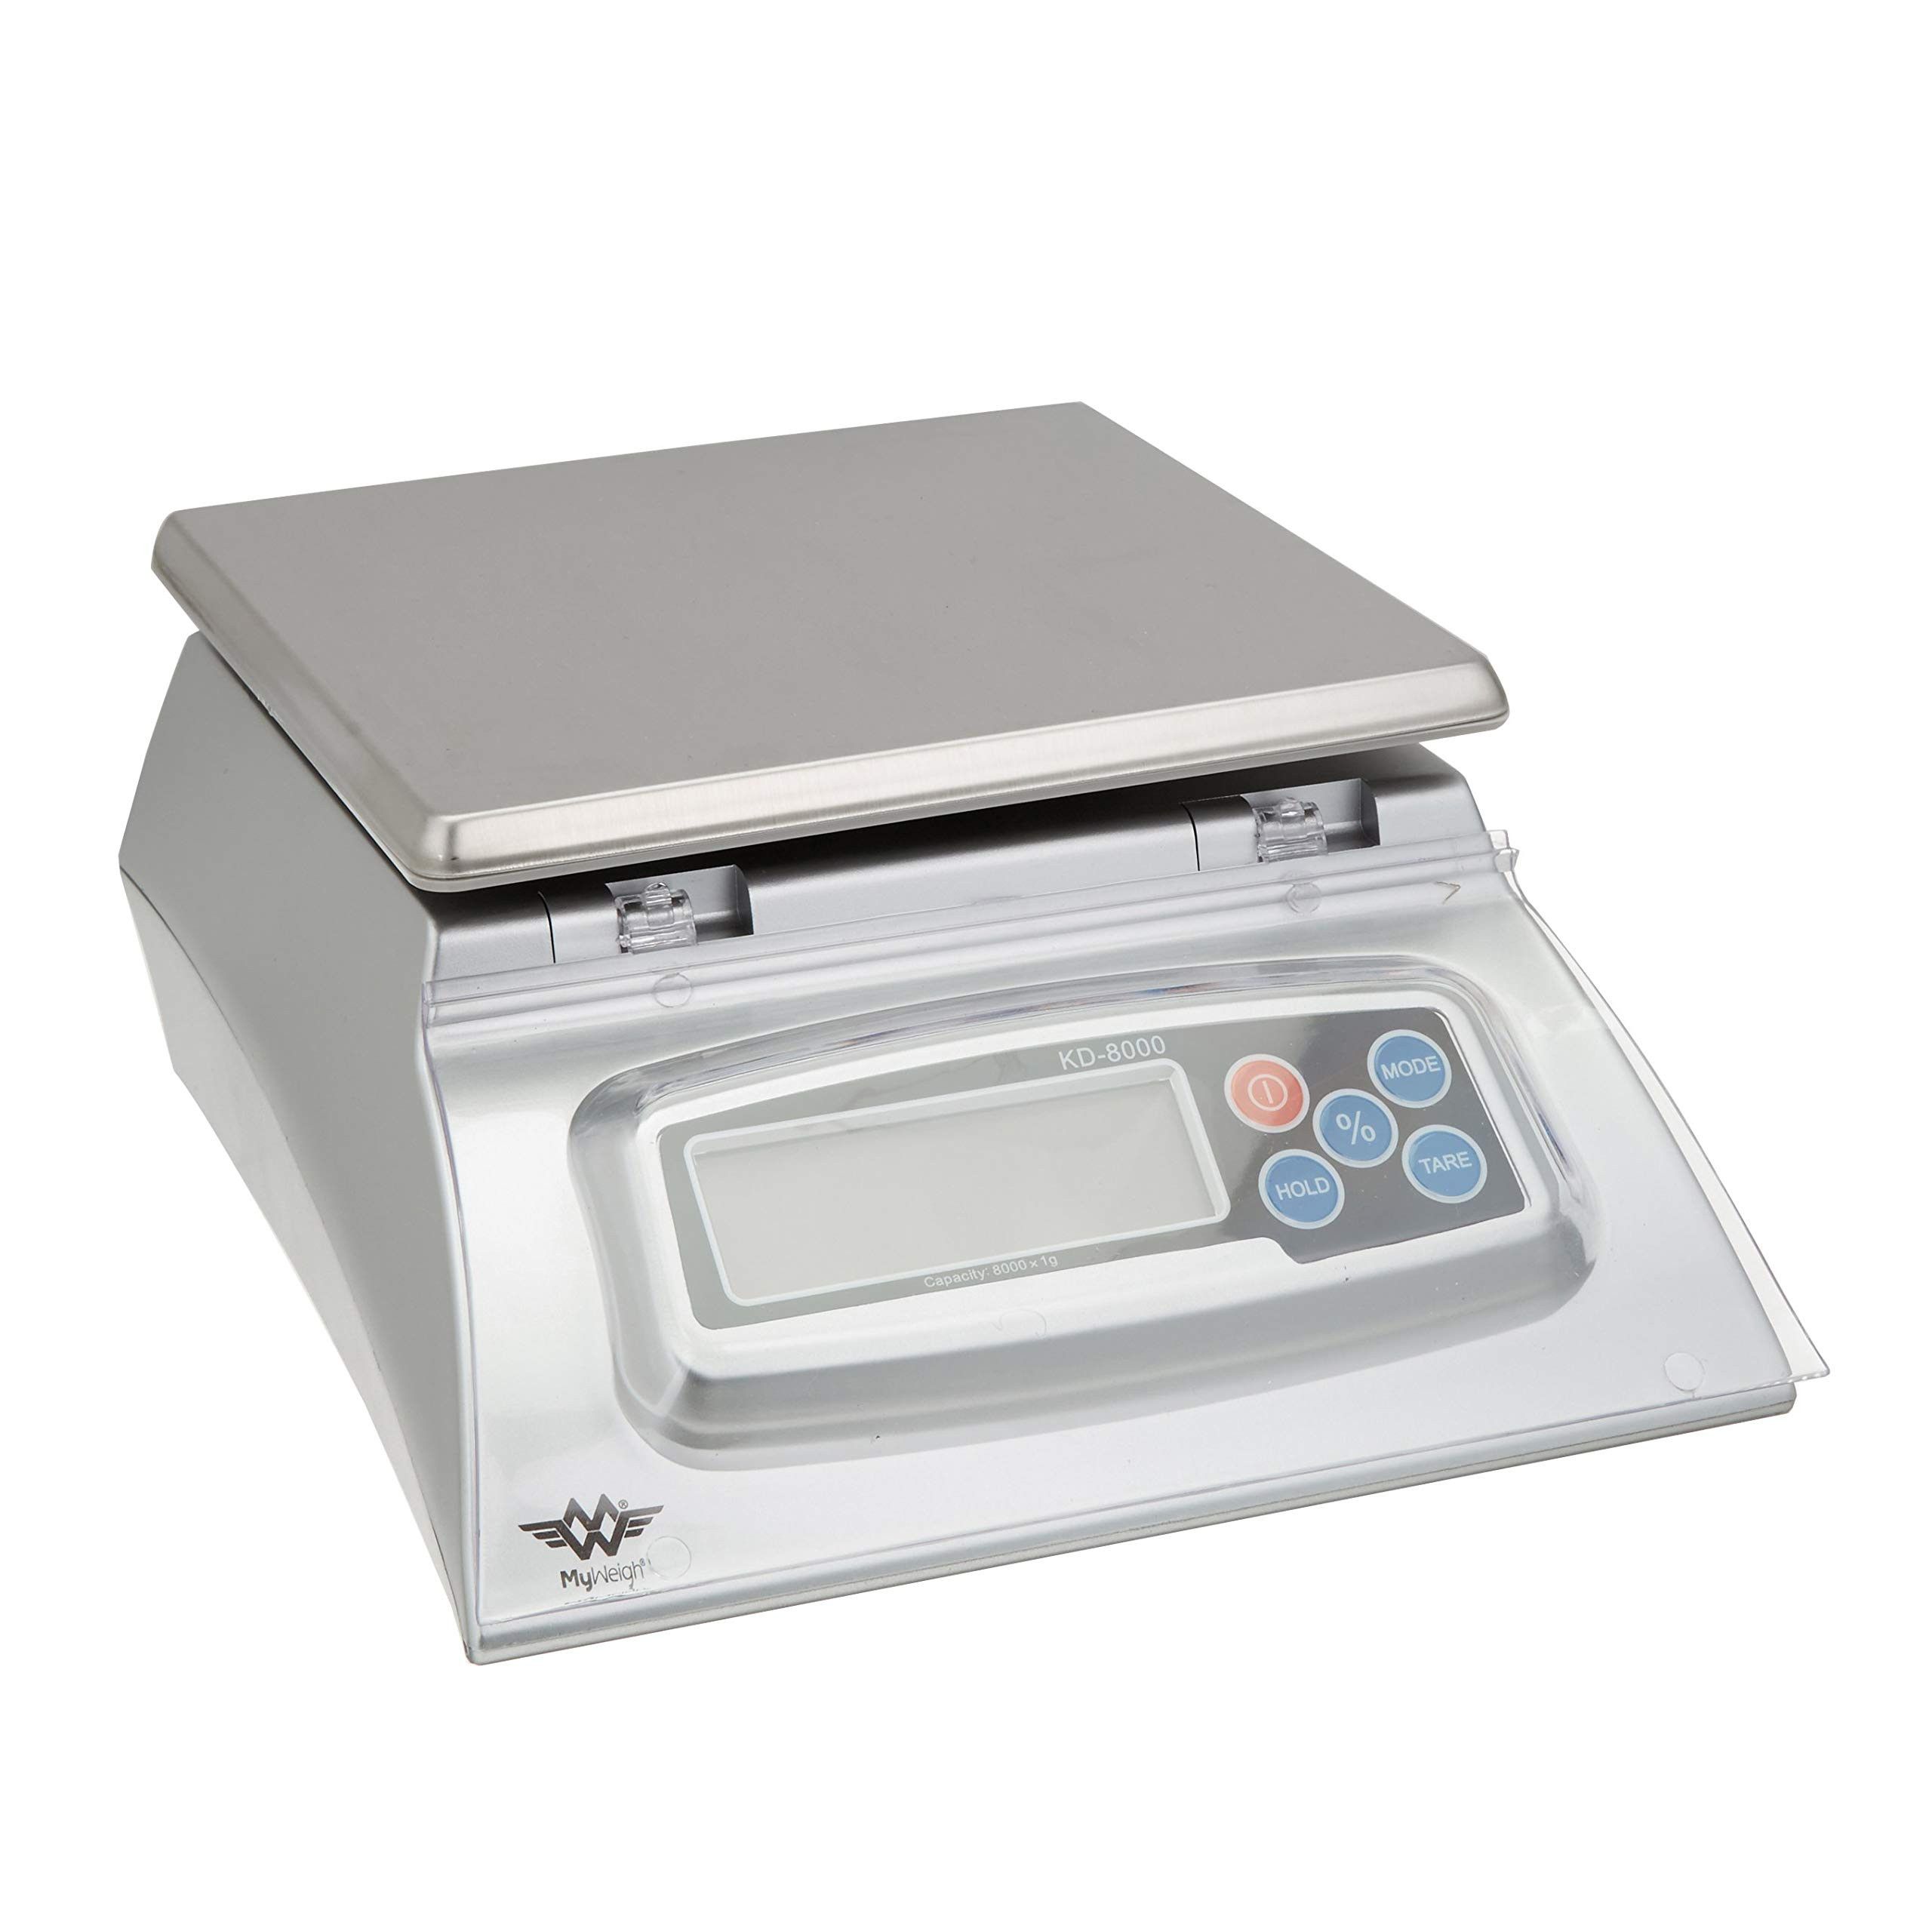 Kitchen Scale - Bakers Math Kitchen Scale - KD8000 Scale by My Weight, Silver | Amazon (US)